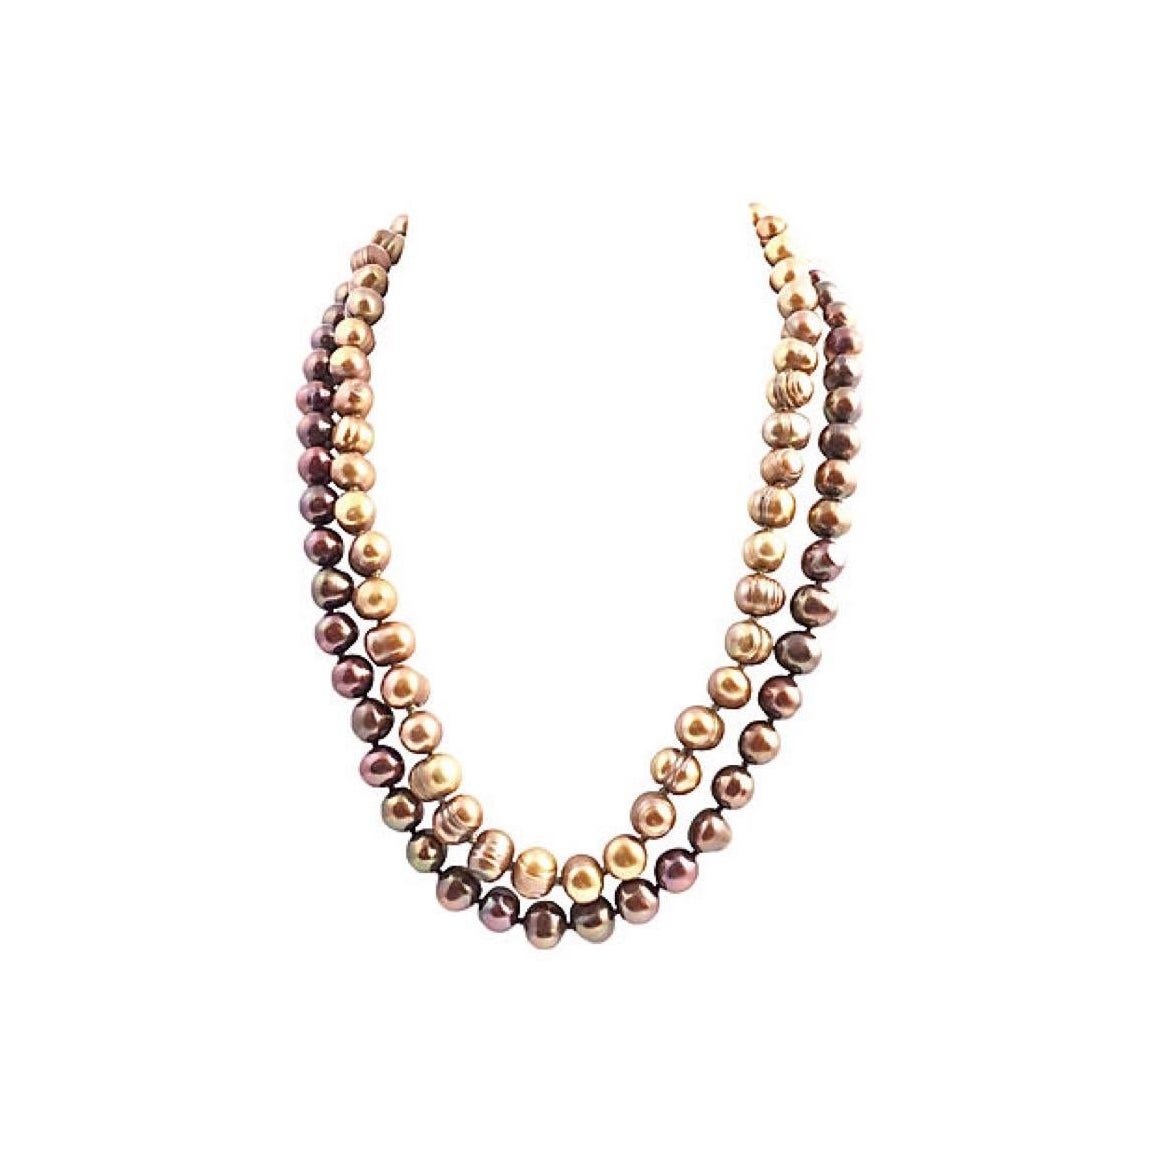 Golden and Mocha Cultured Pearl Necklaces Pair Set of 2 For Sale